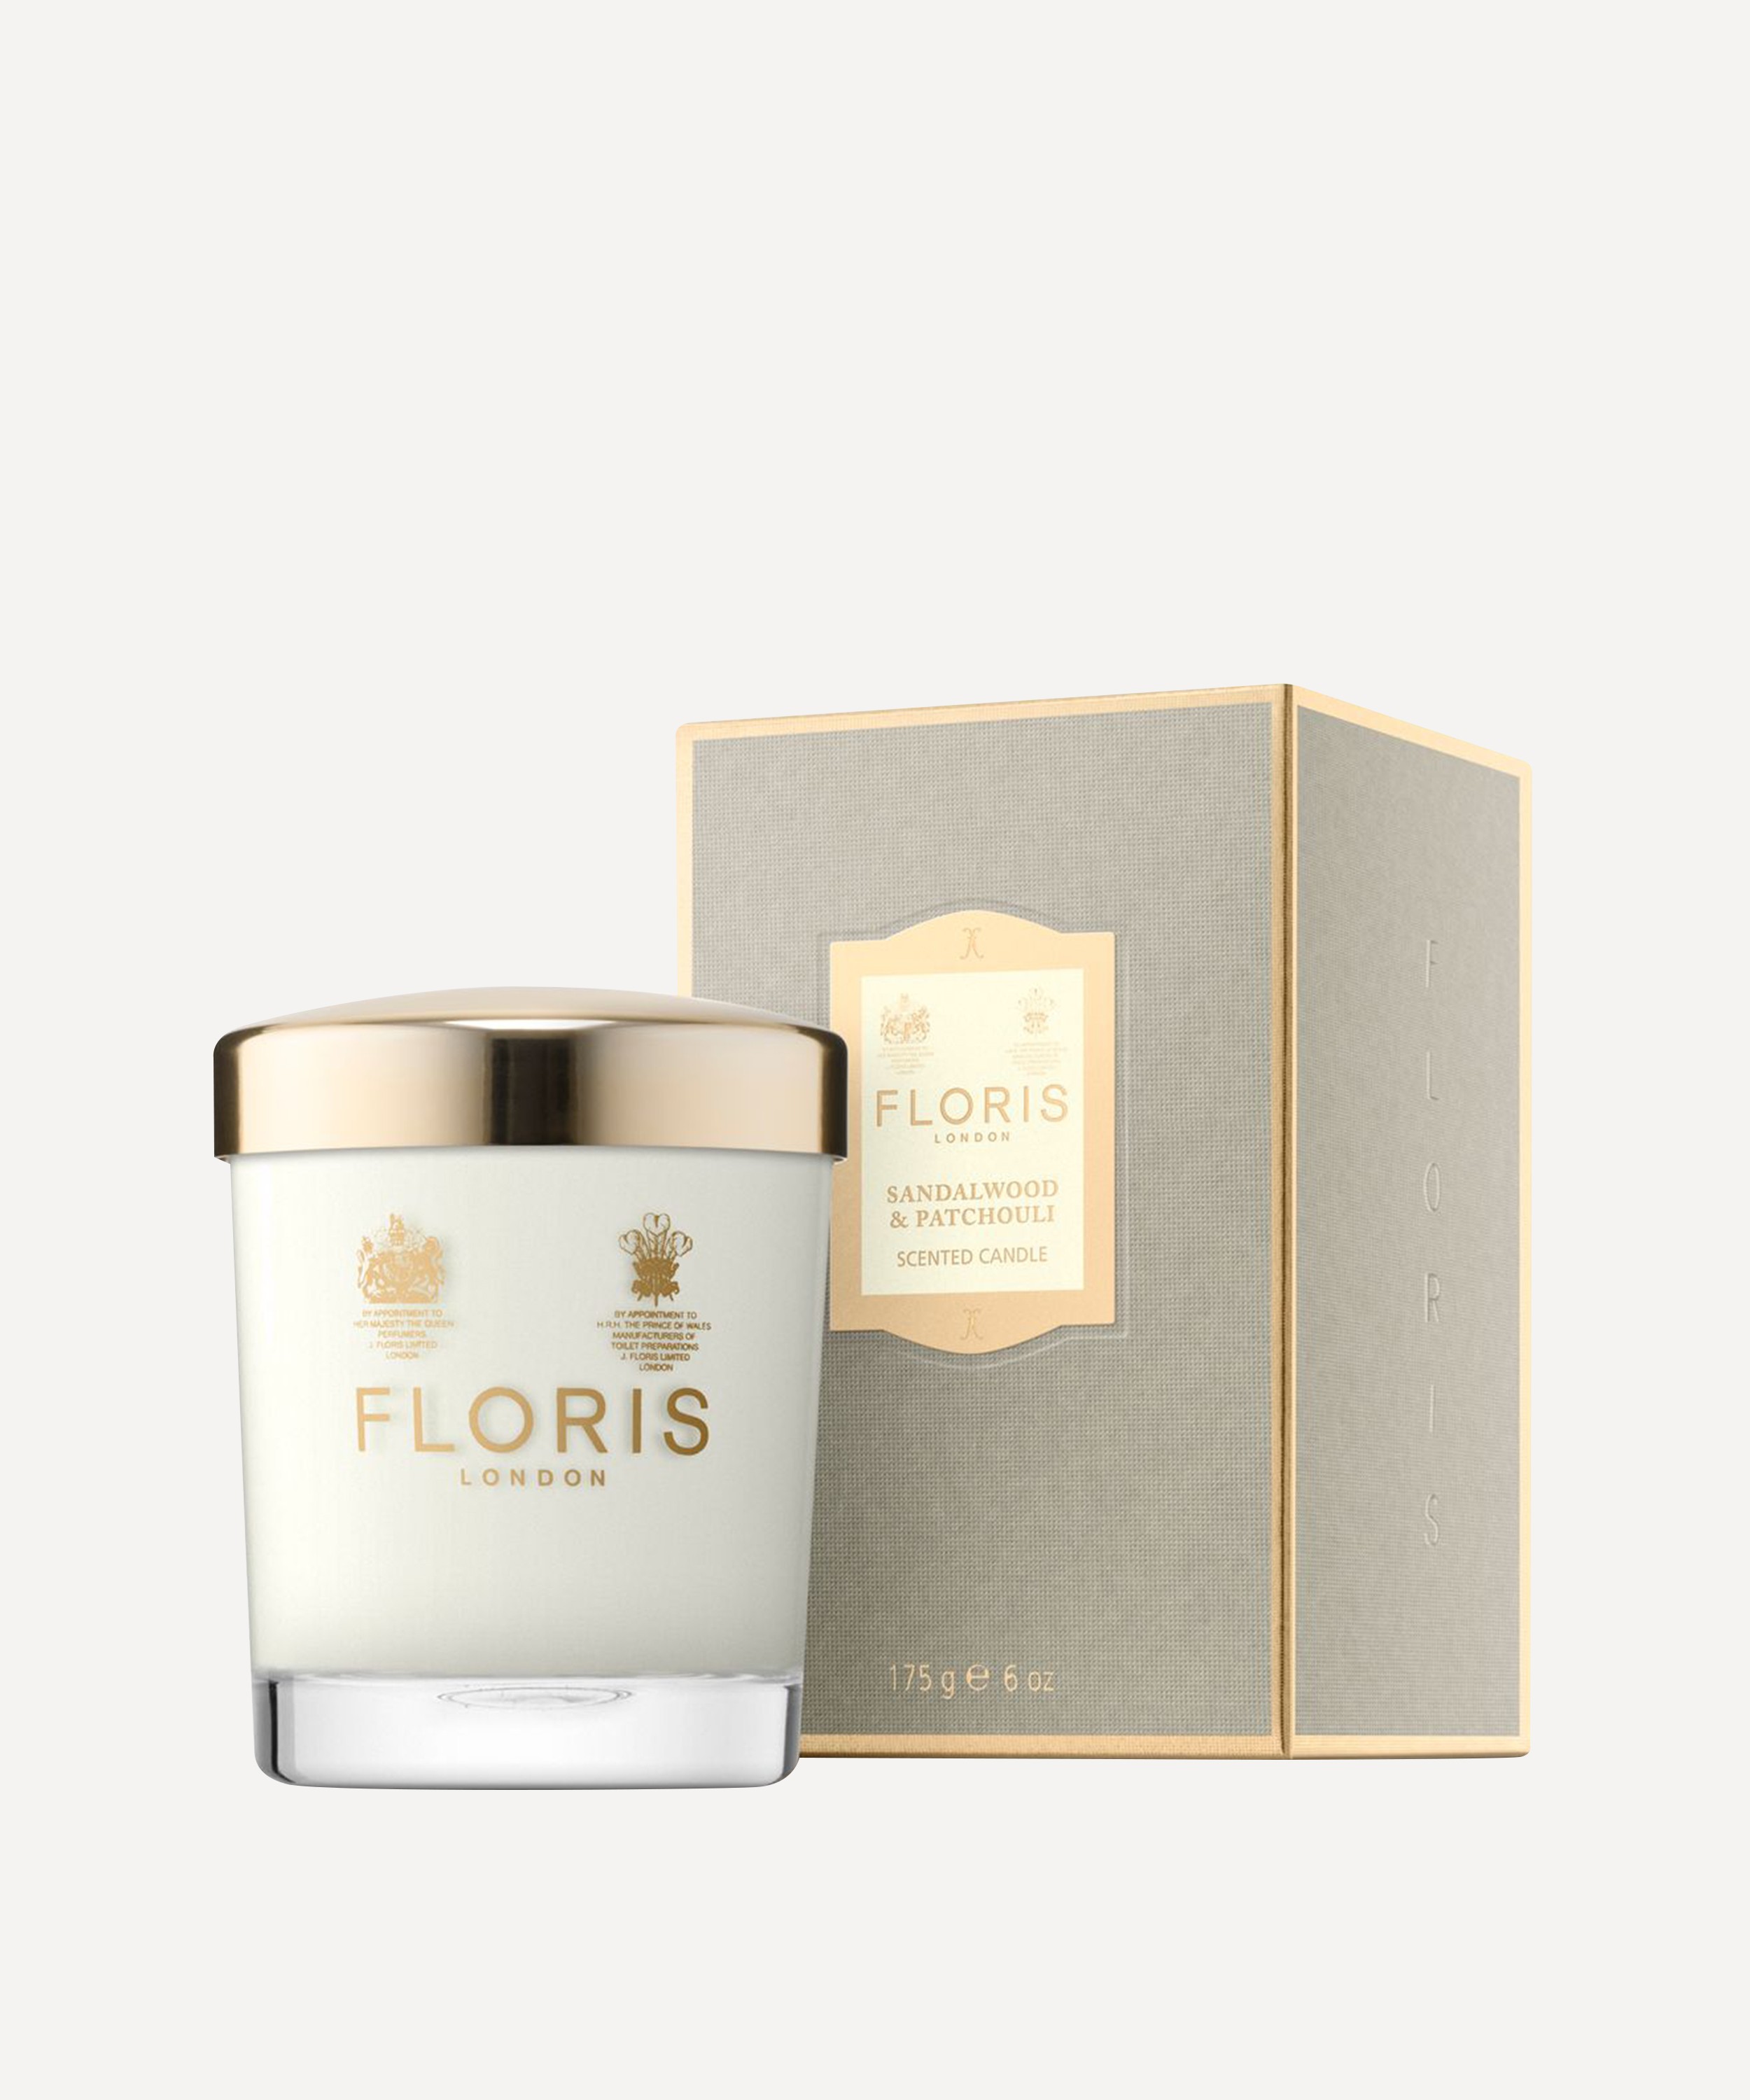 Floris London - Sandalwood and Patchouli Scented Candle 175g image number 1